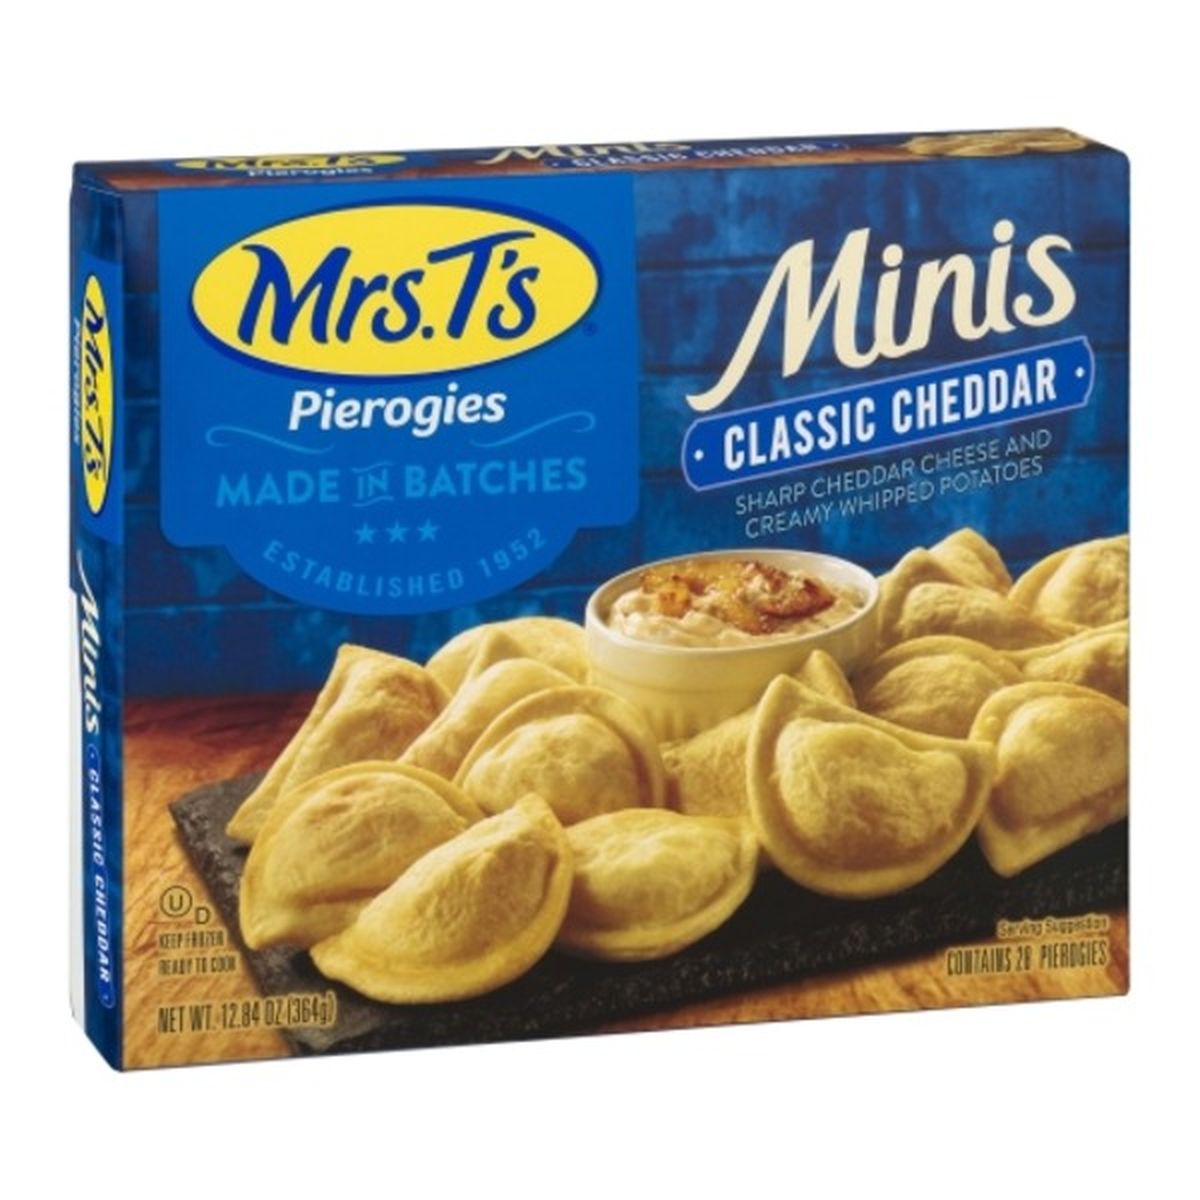 Calories in Mrs Ts Pierogies, Classic Cheddar, Minis